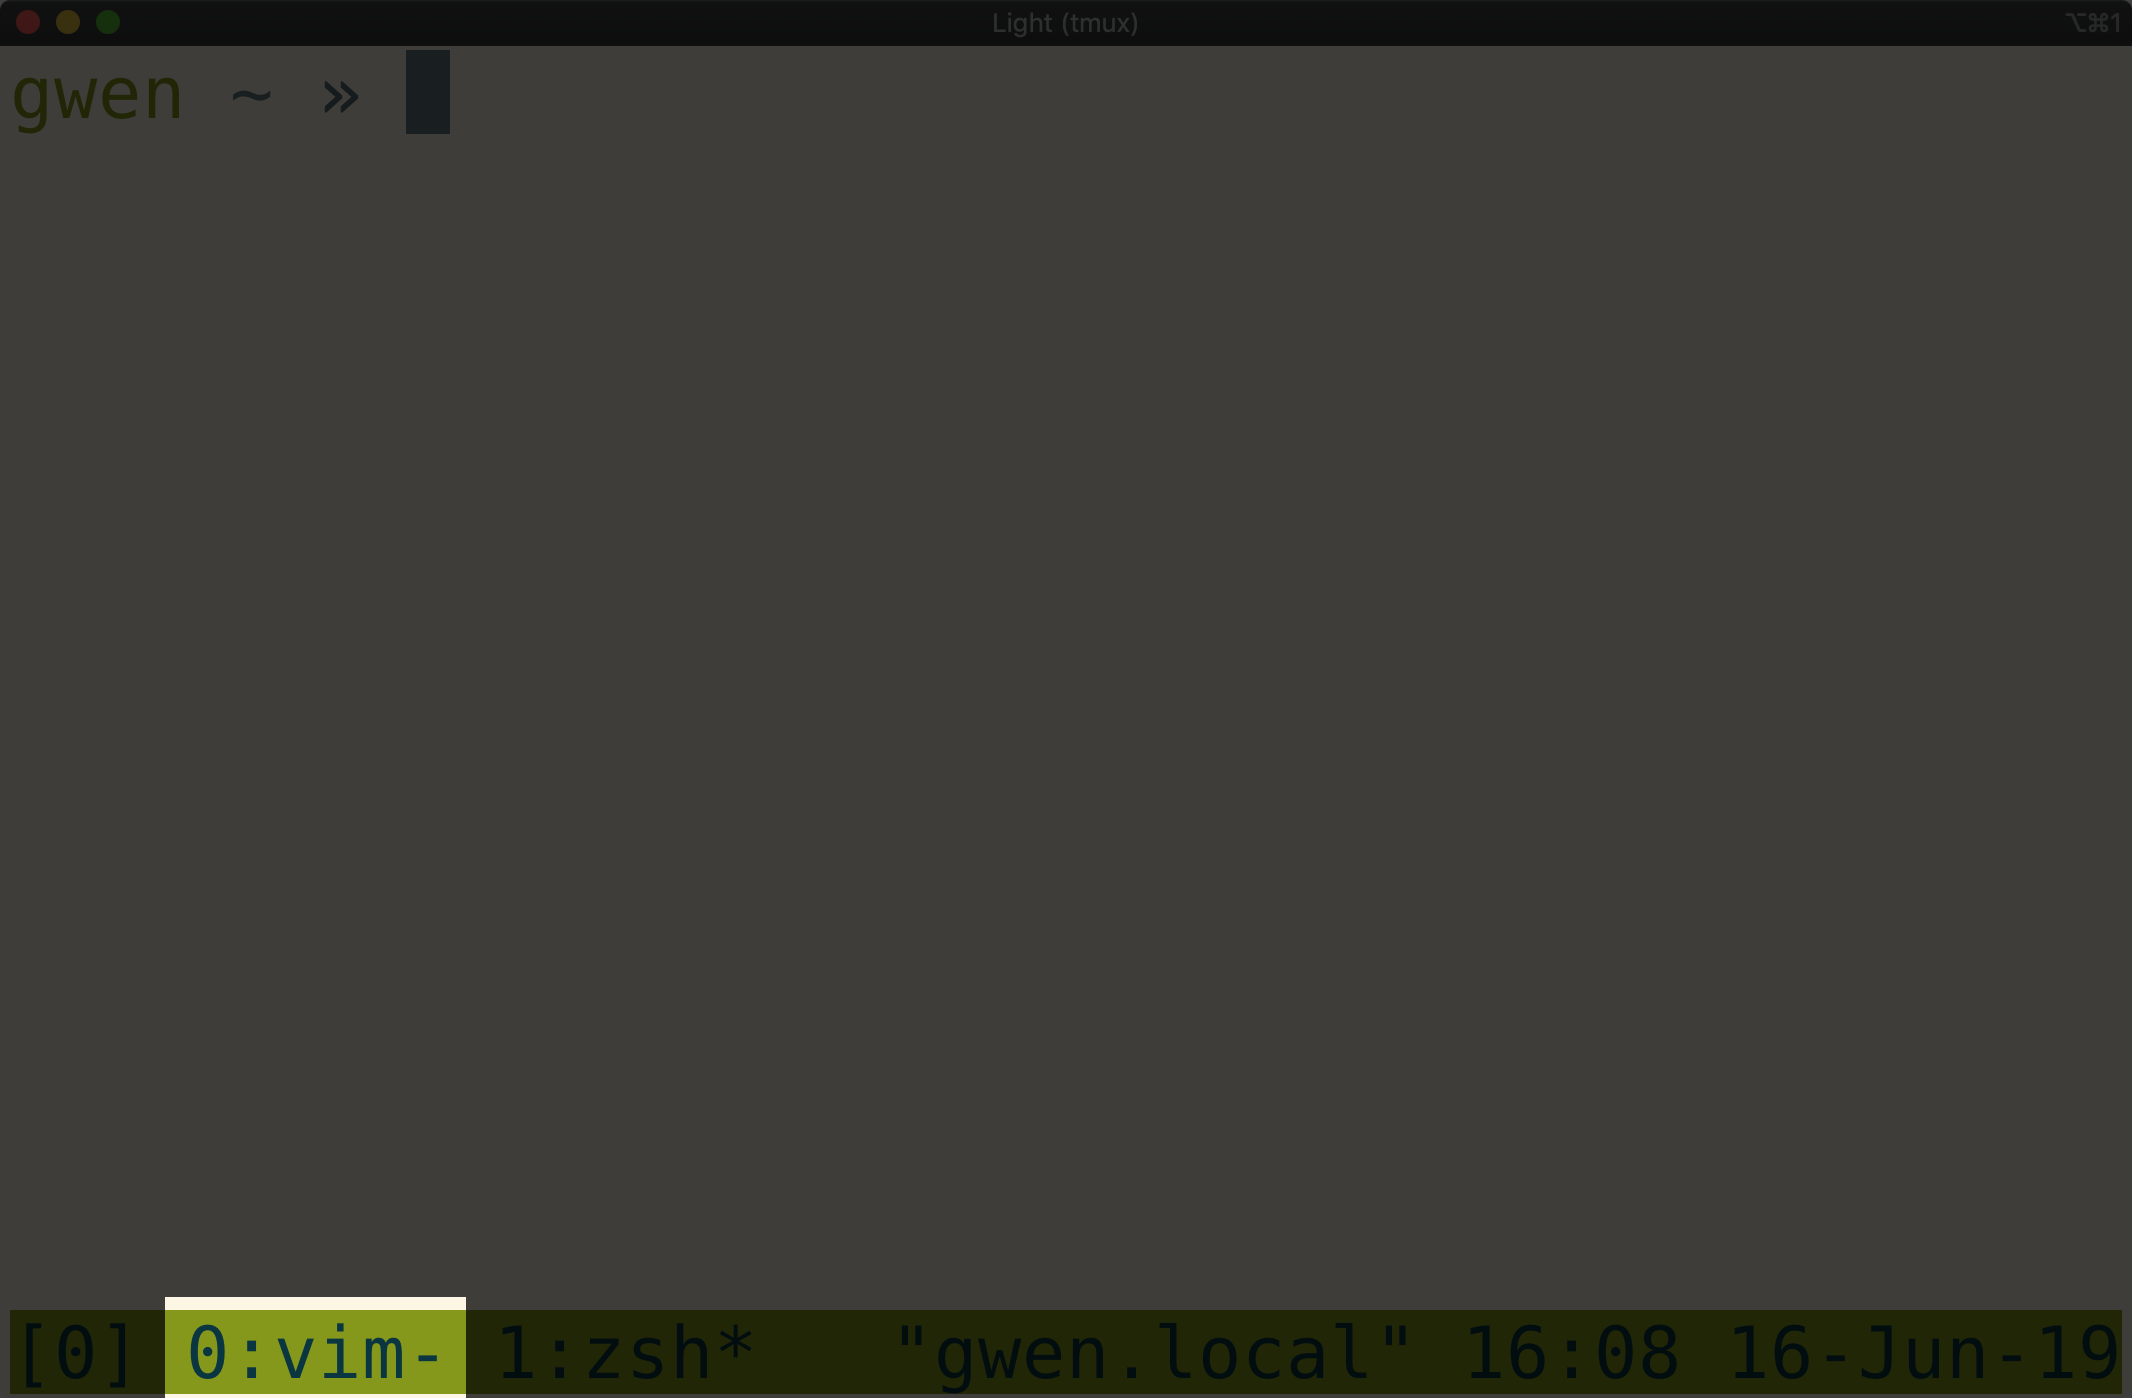 Tmux window with the previous window in the status bar highlighted